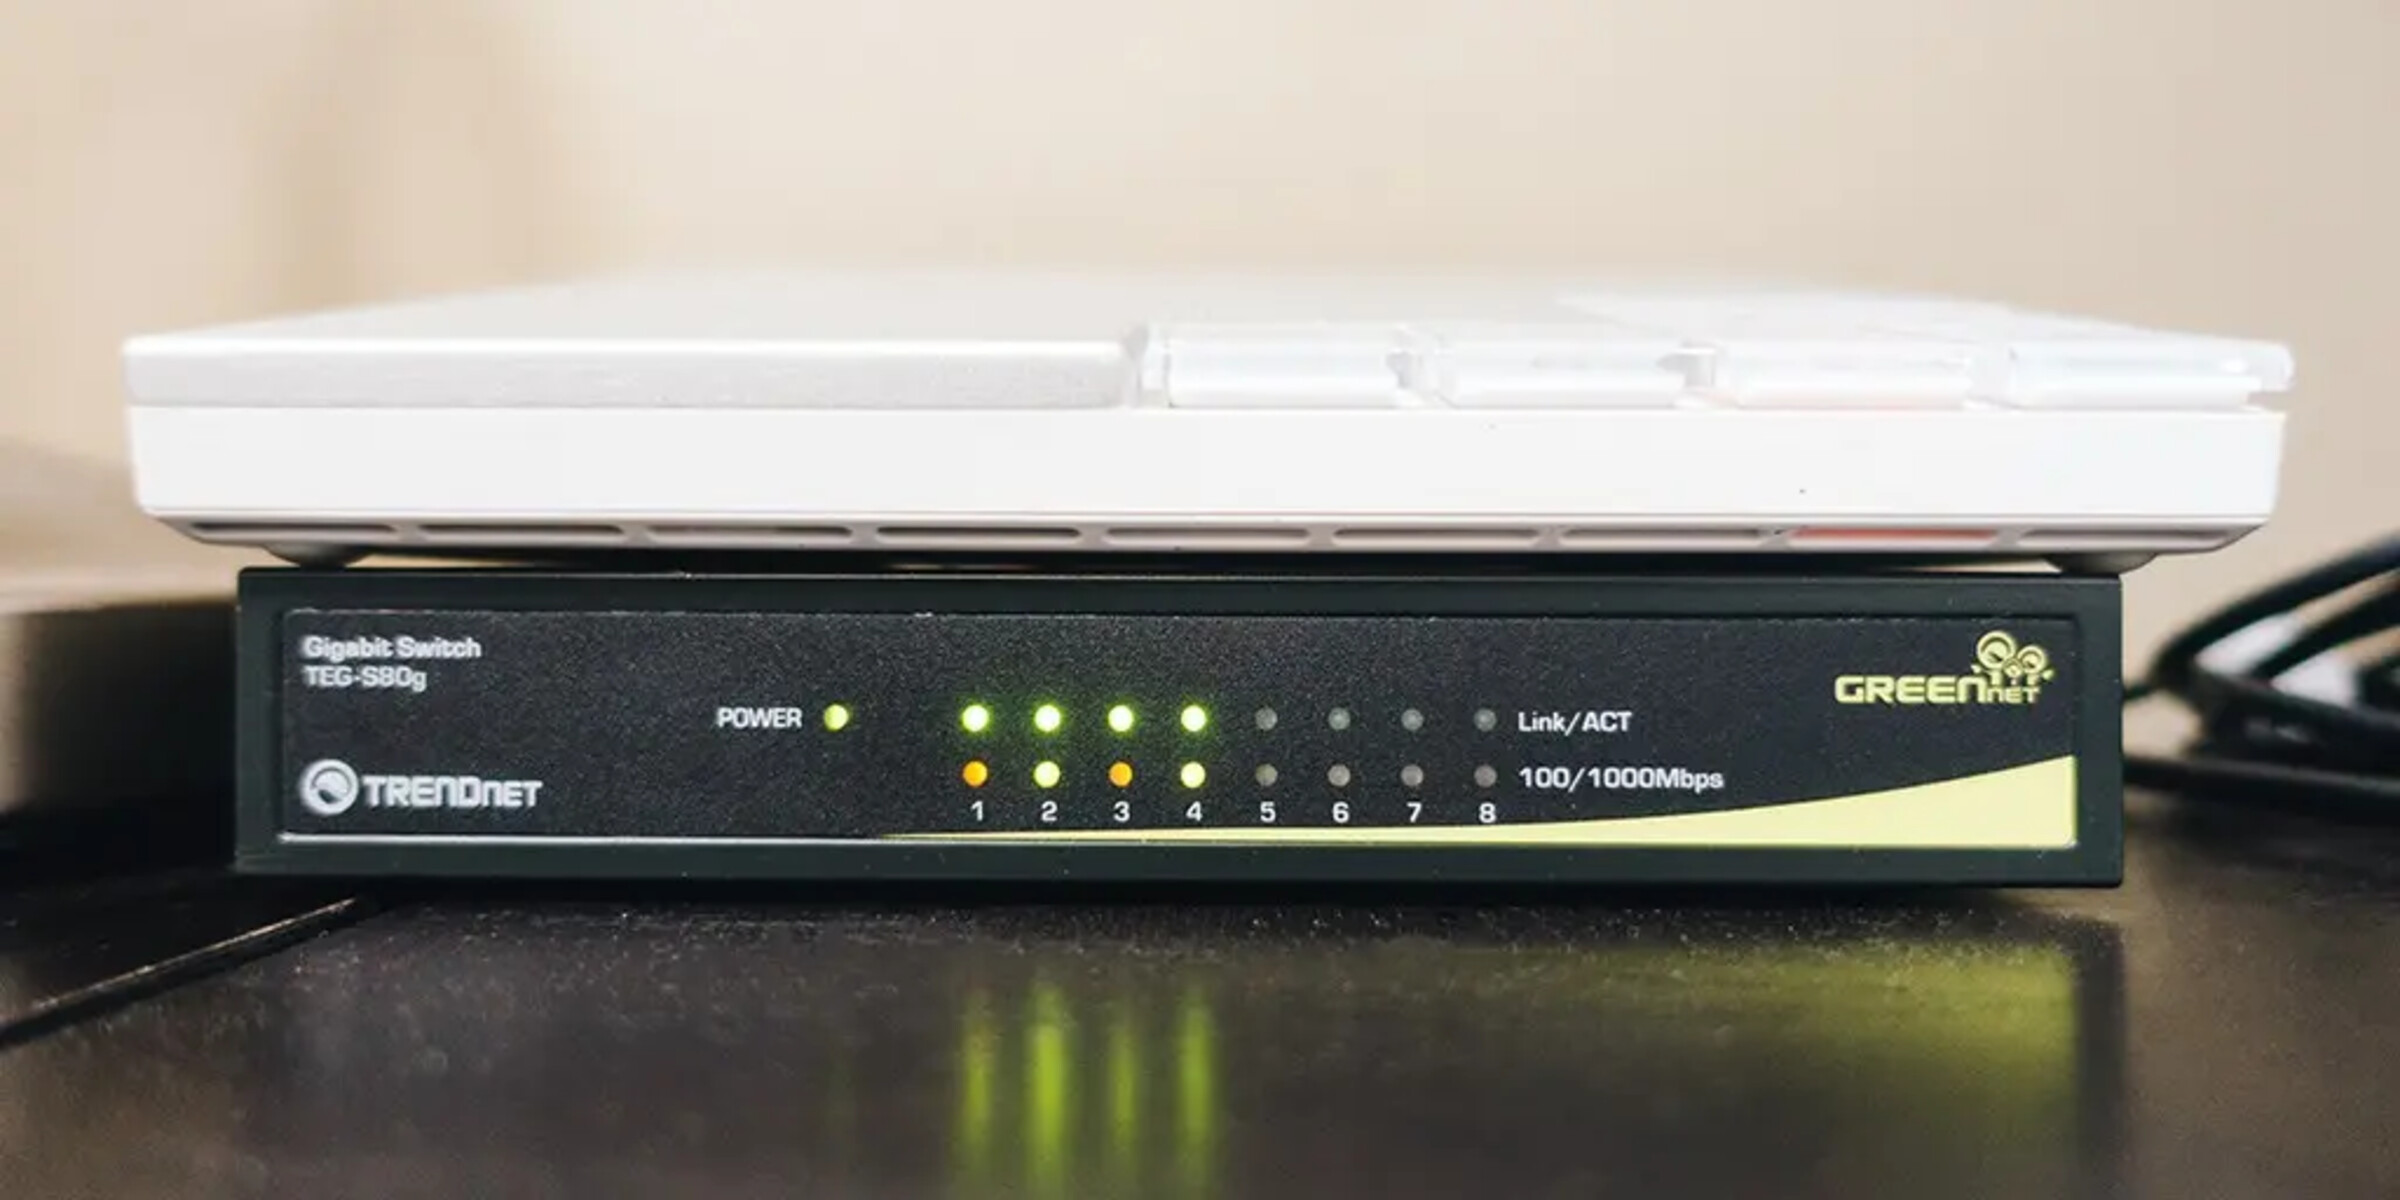 How To Use A Router As A Network Switch